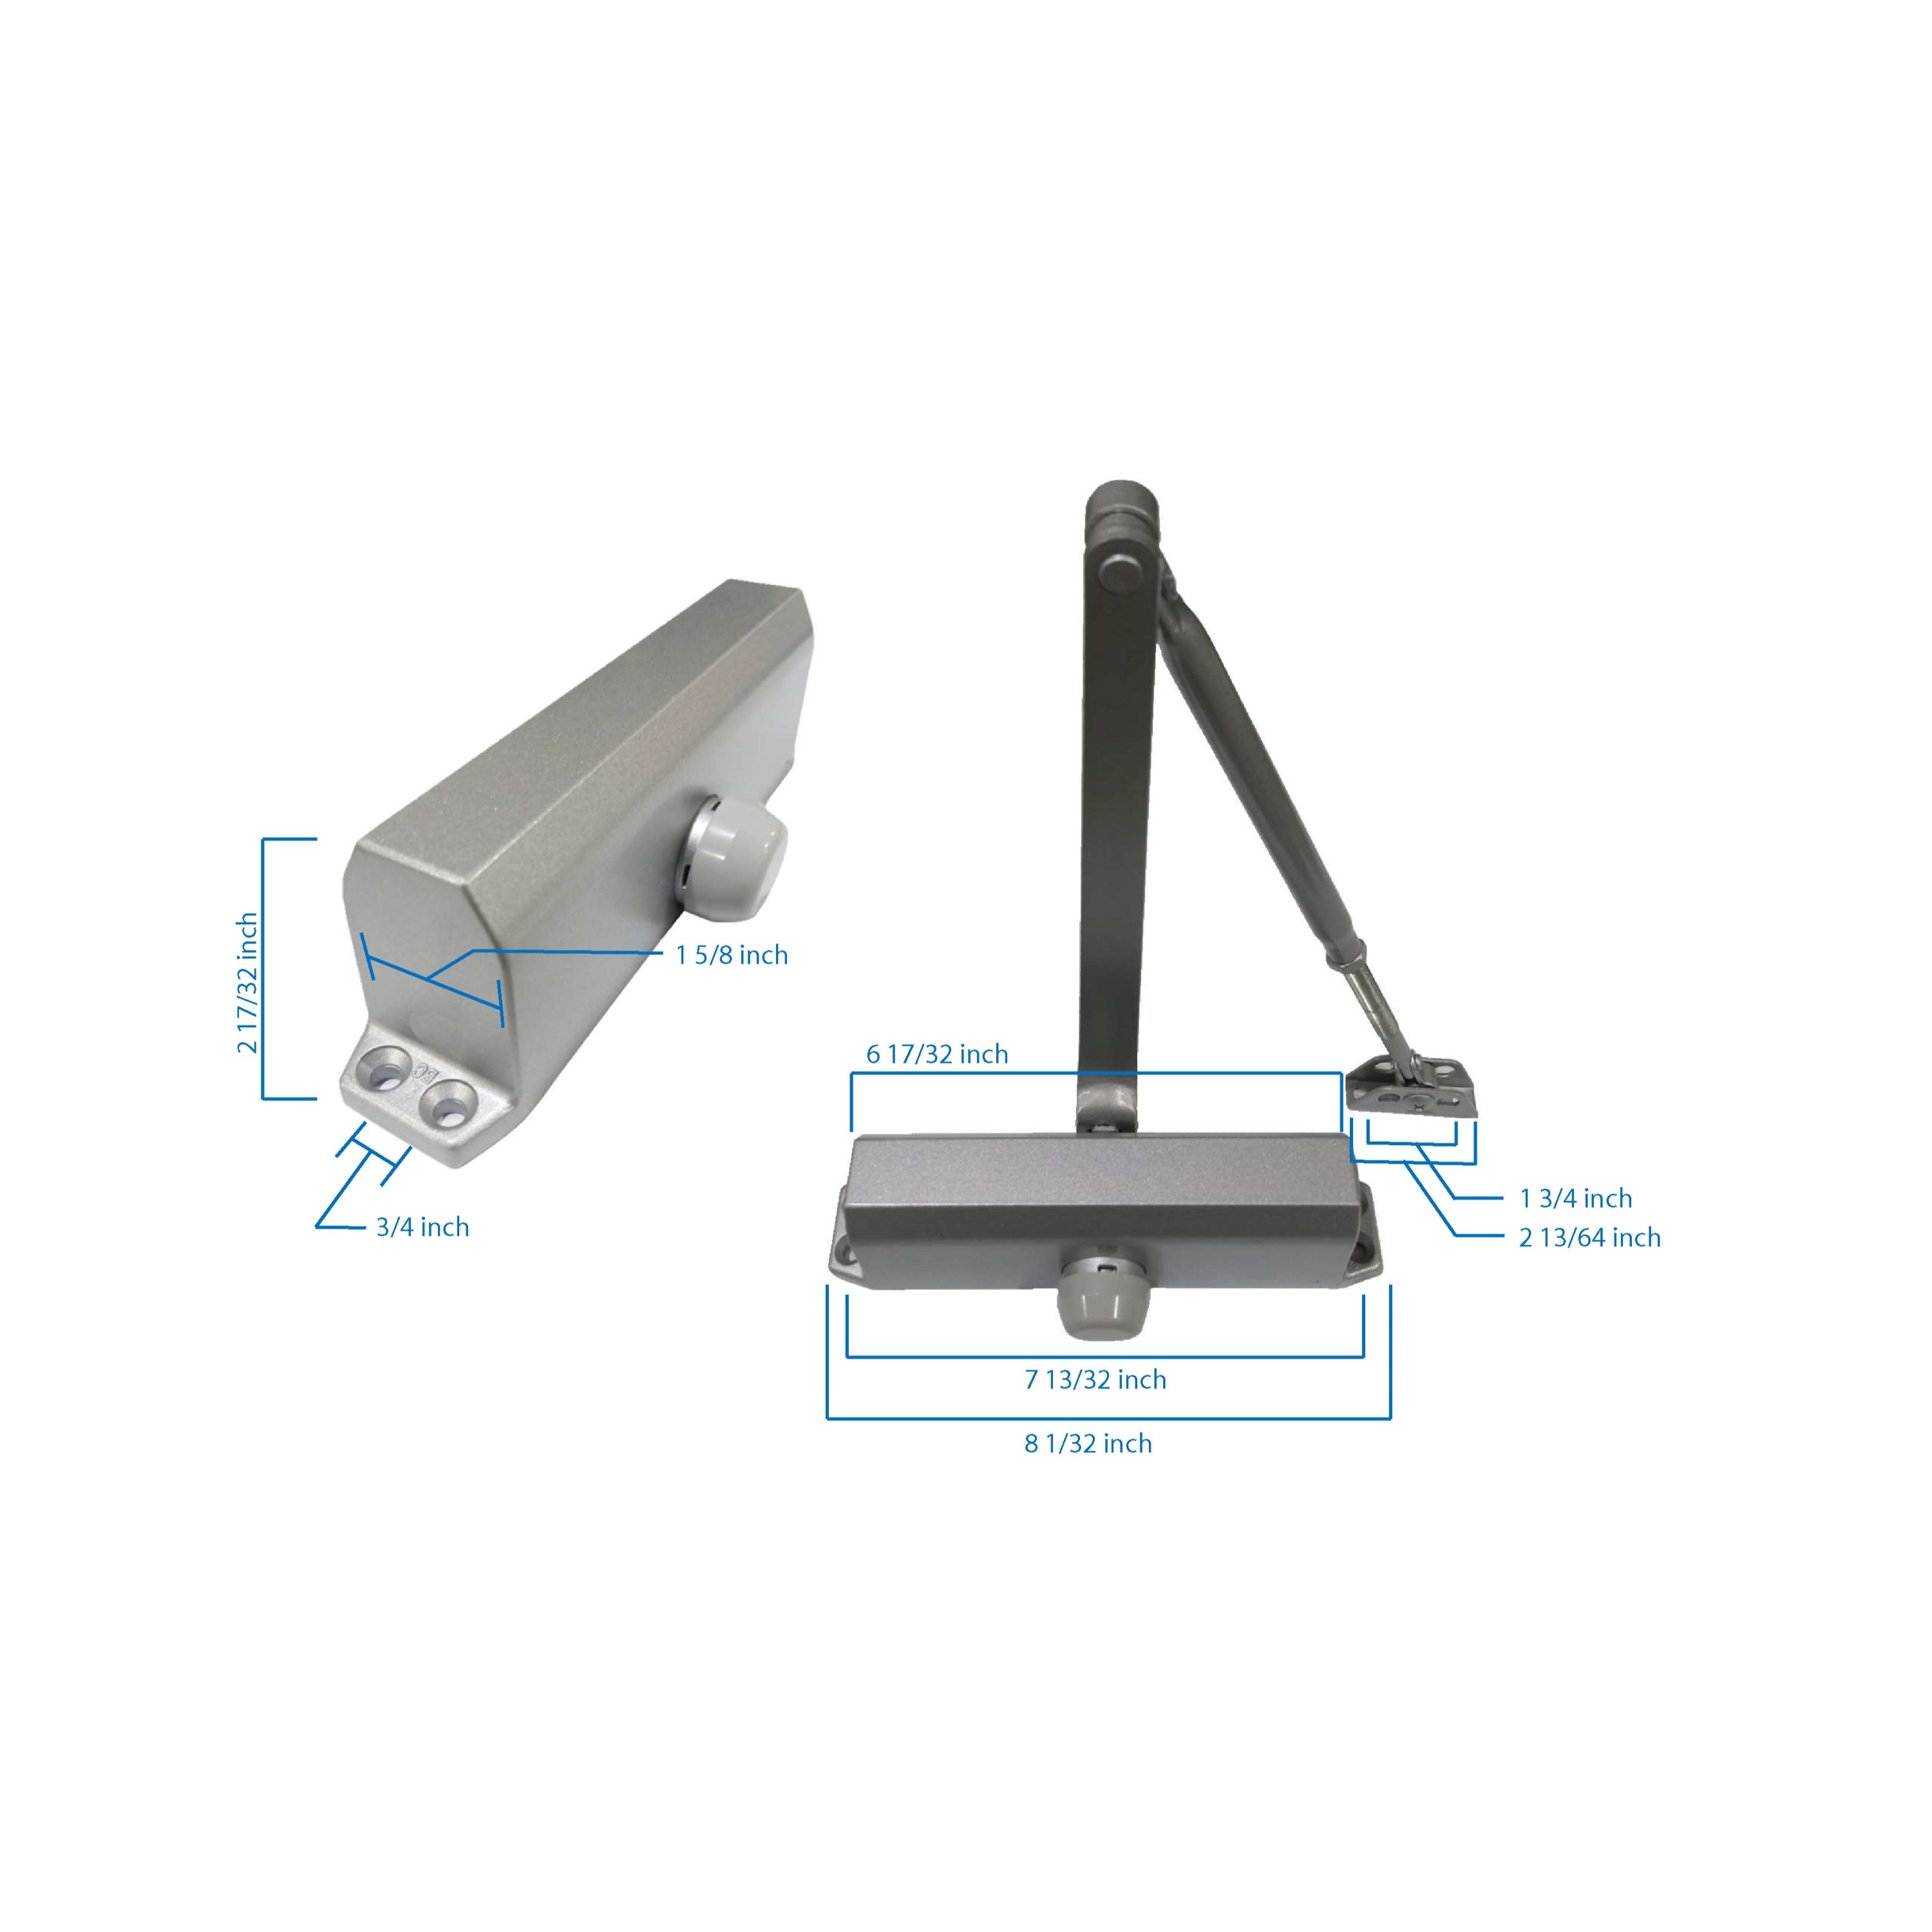 Commercial Grade 3 Door Closer with Hold Open Arm in Aluminum - Size 3